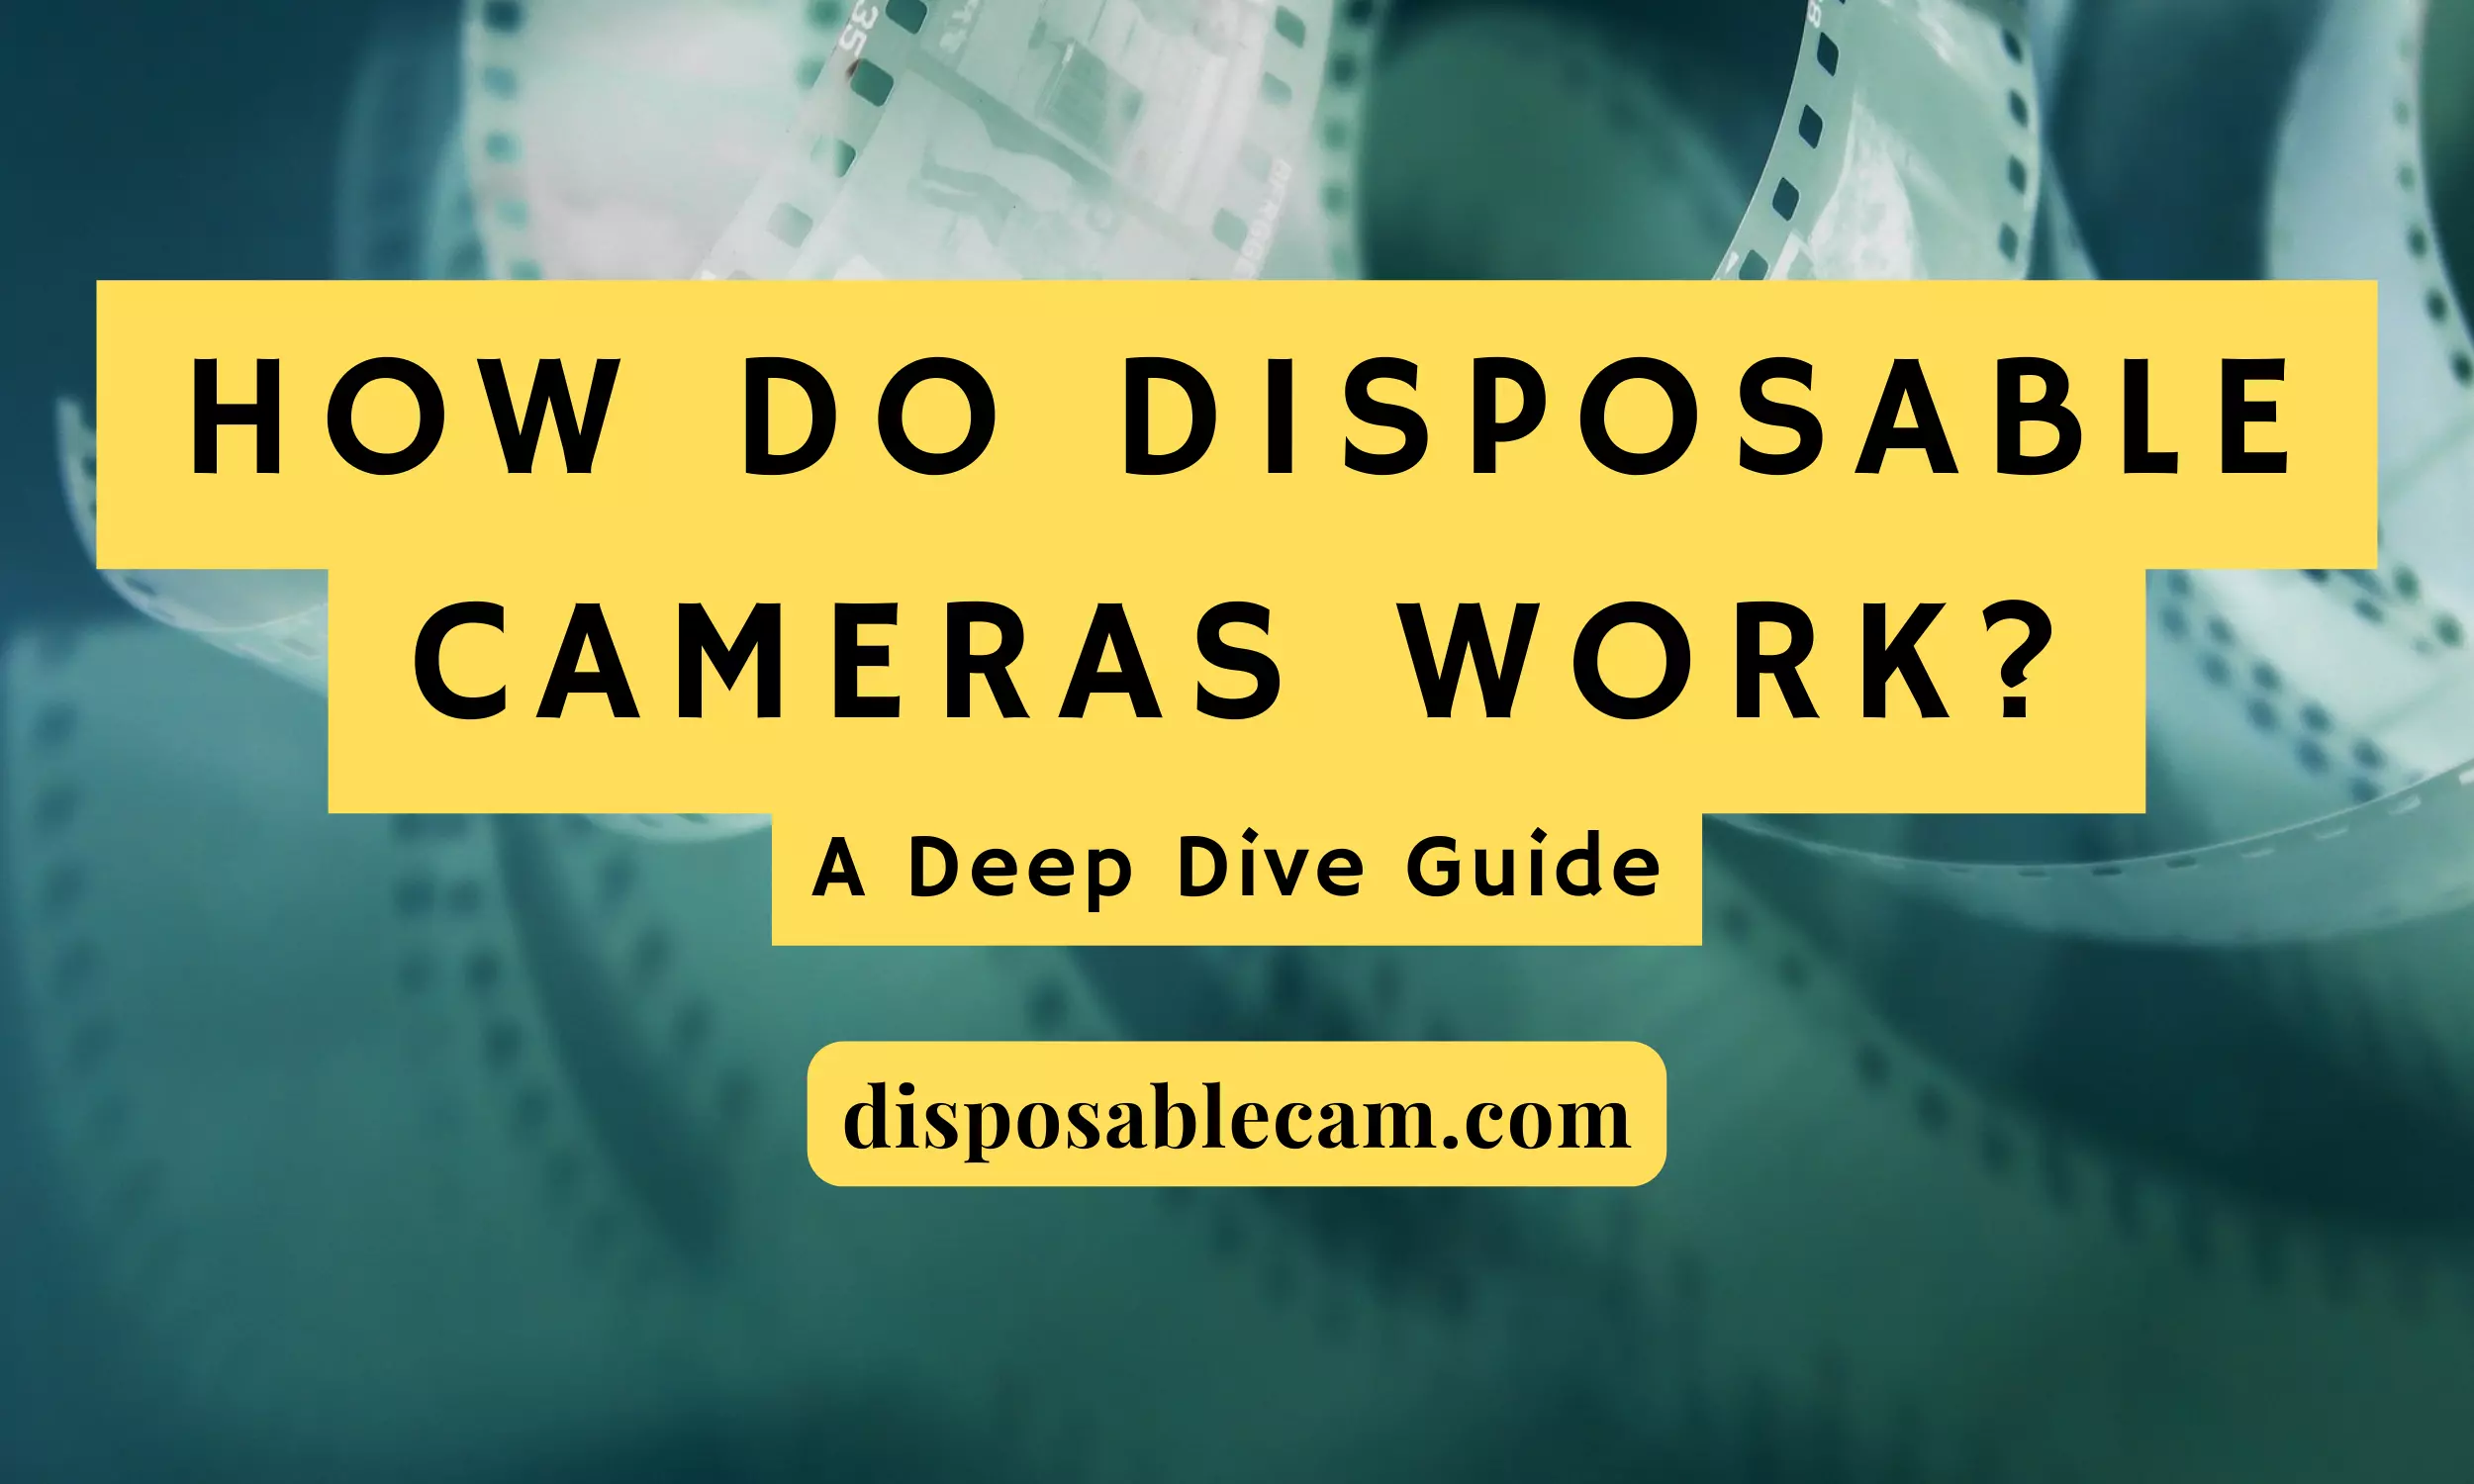 Discover how disposable cameras work and the correct way to utilize them